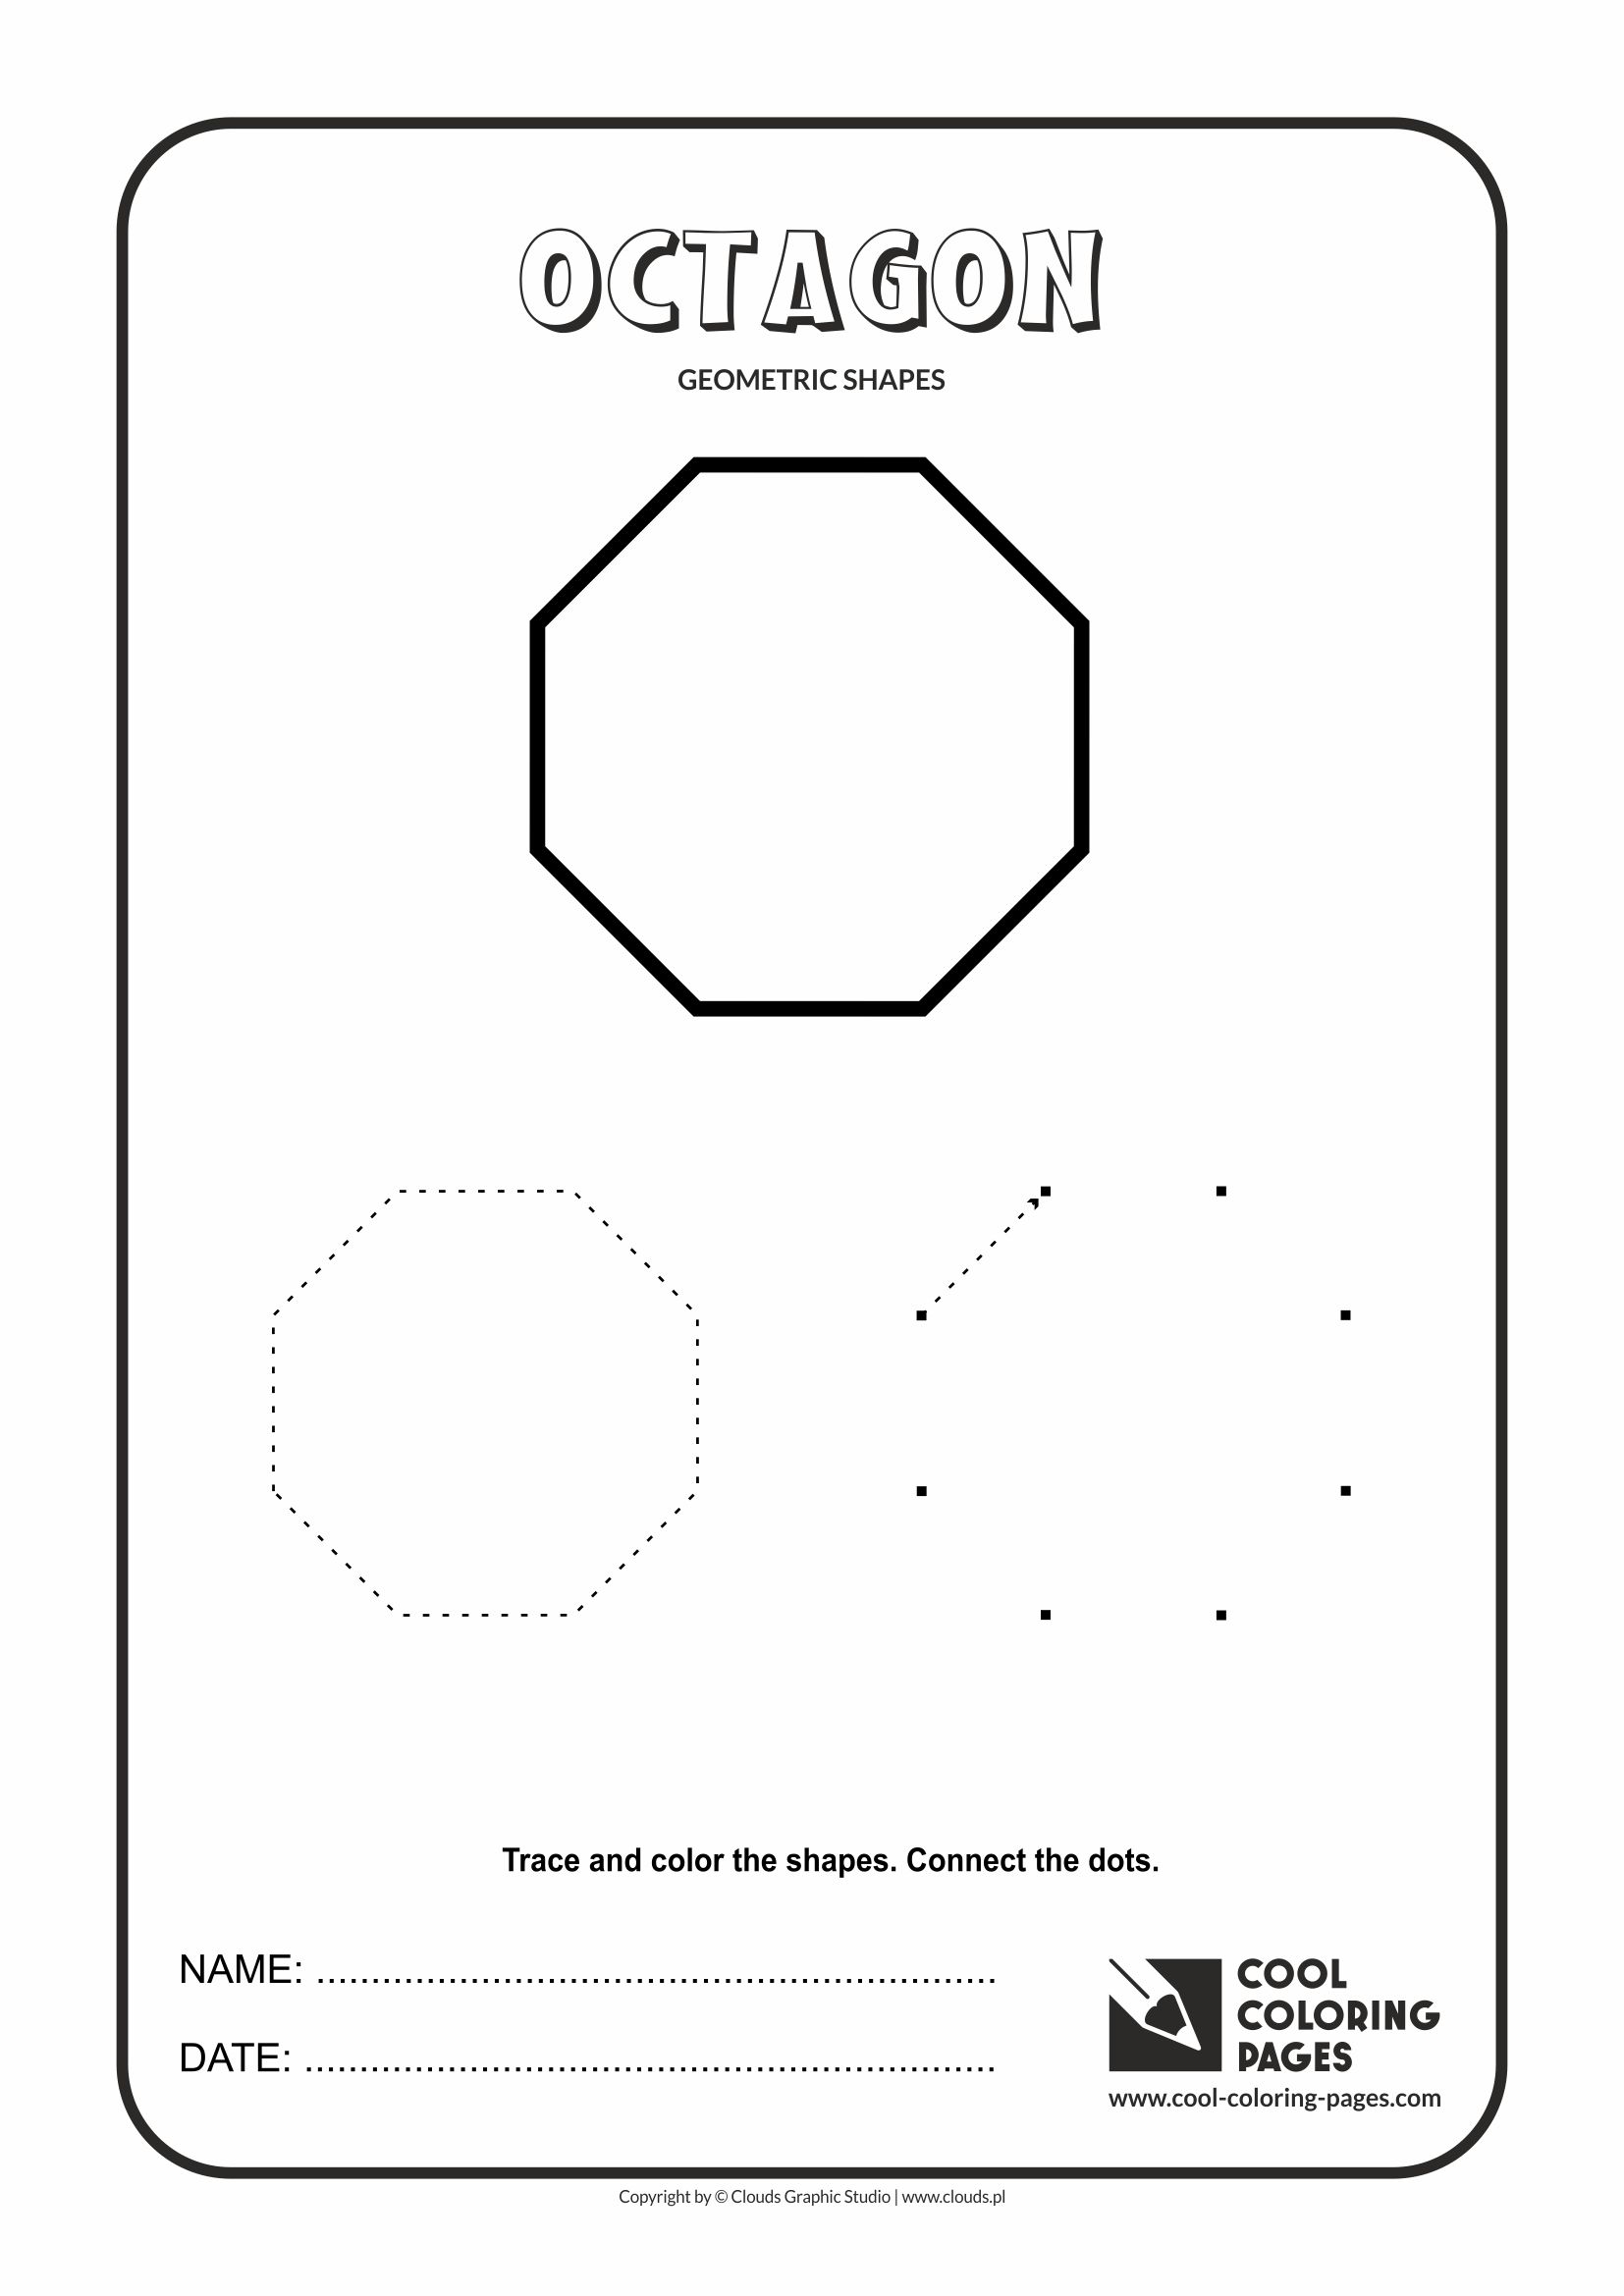 Cool Coloring Pages - Geometric shapes / Octagon